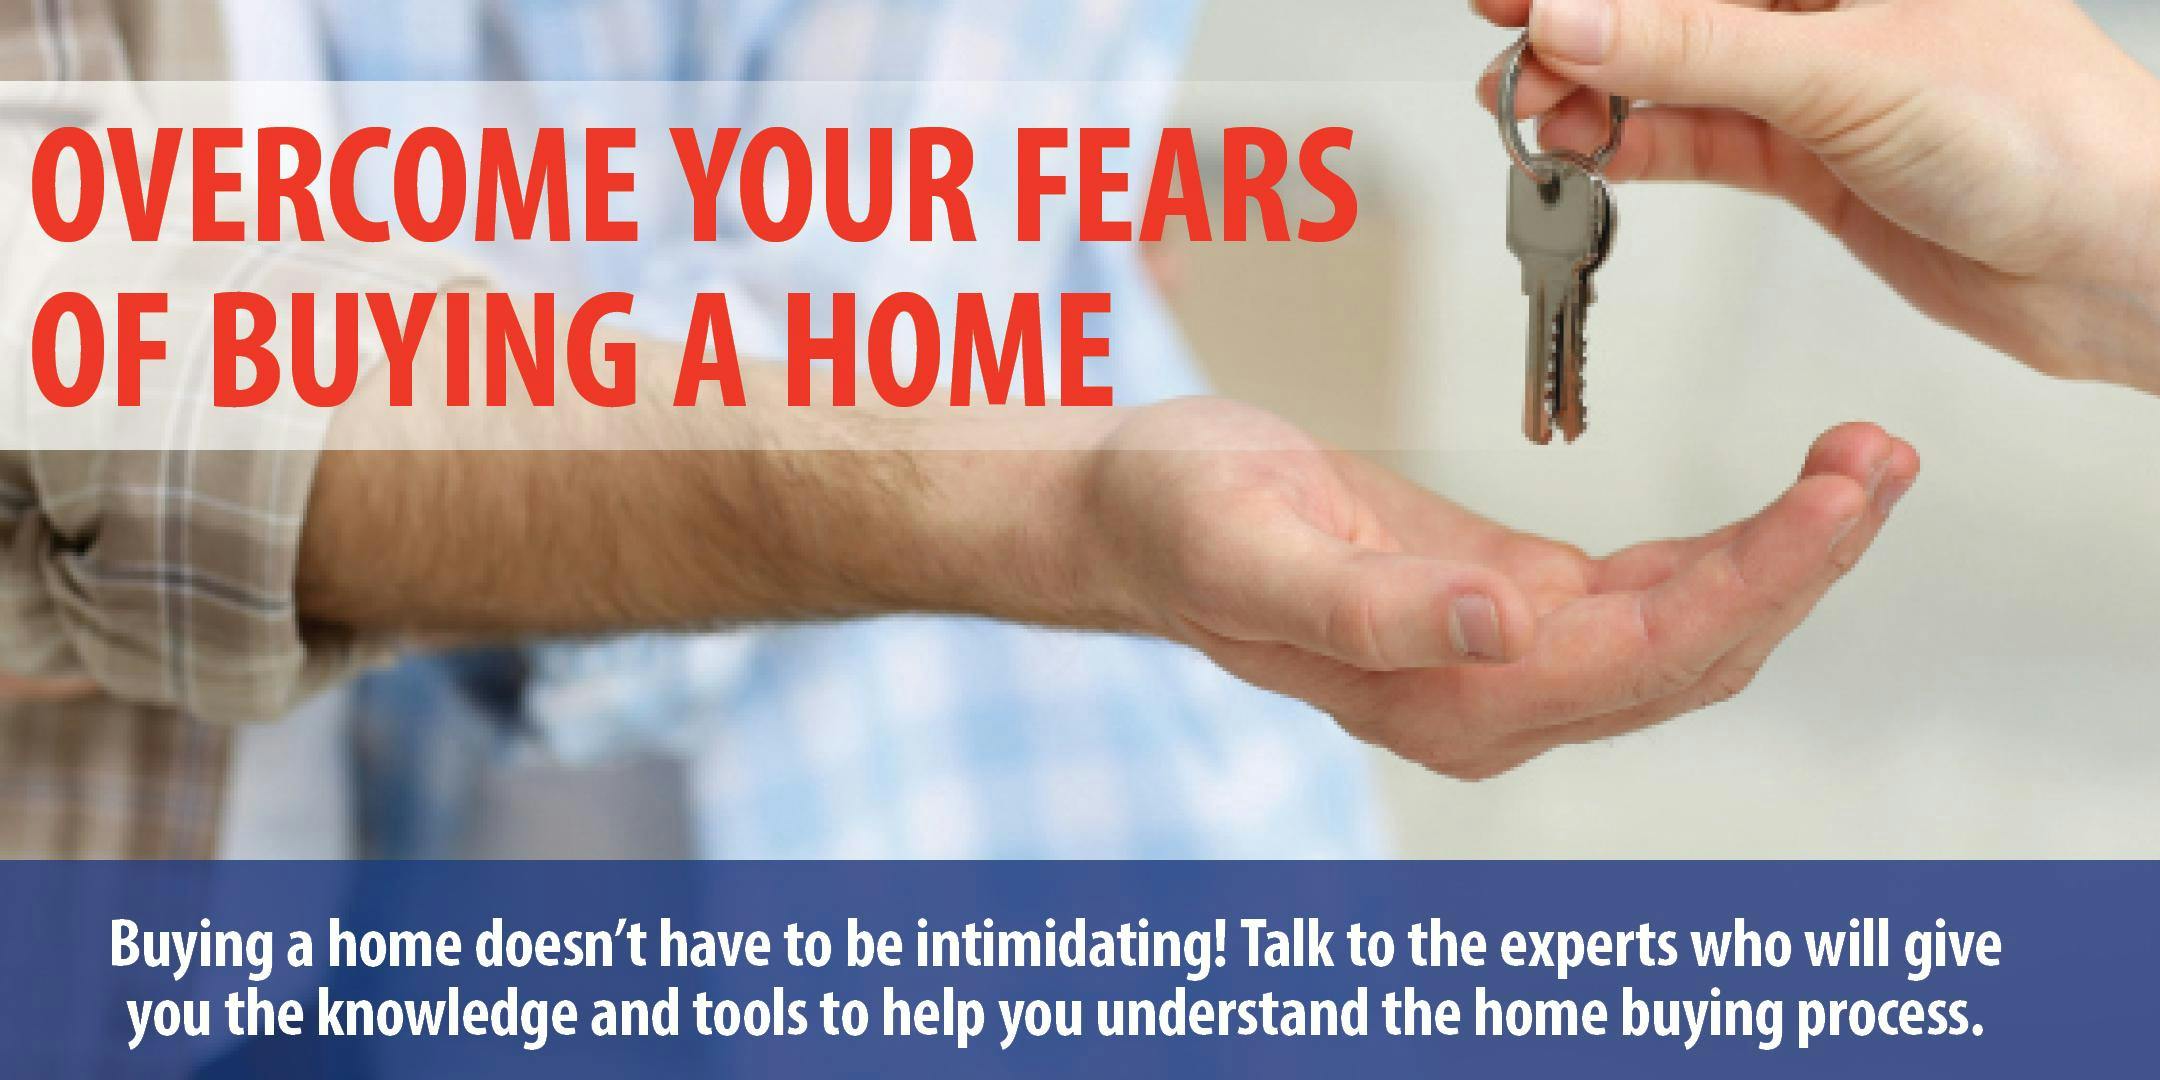 Overcome your fears of buying a home, San Antonio, TX!